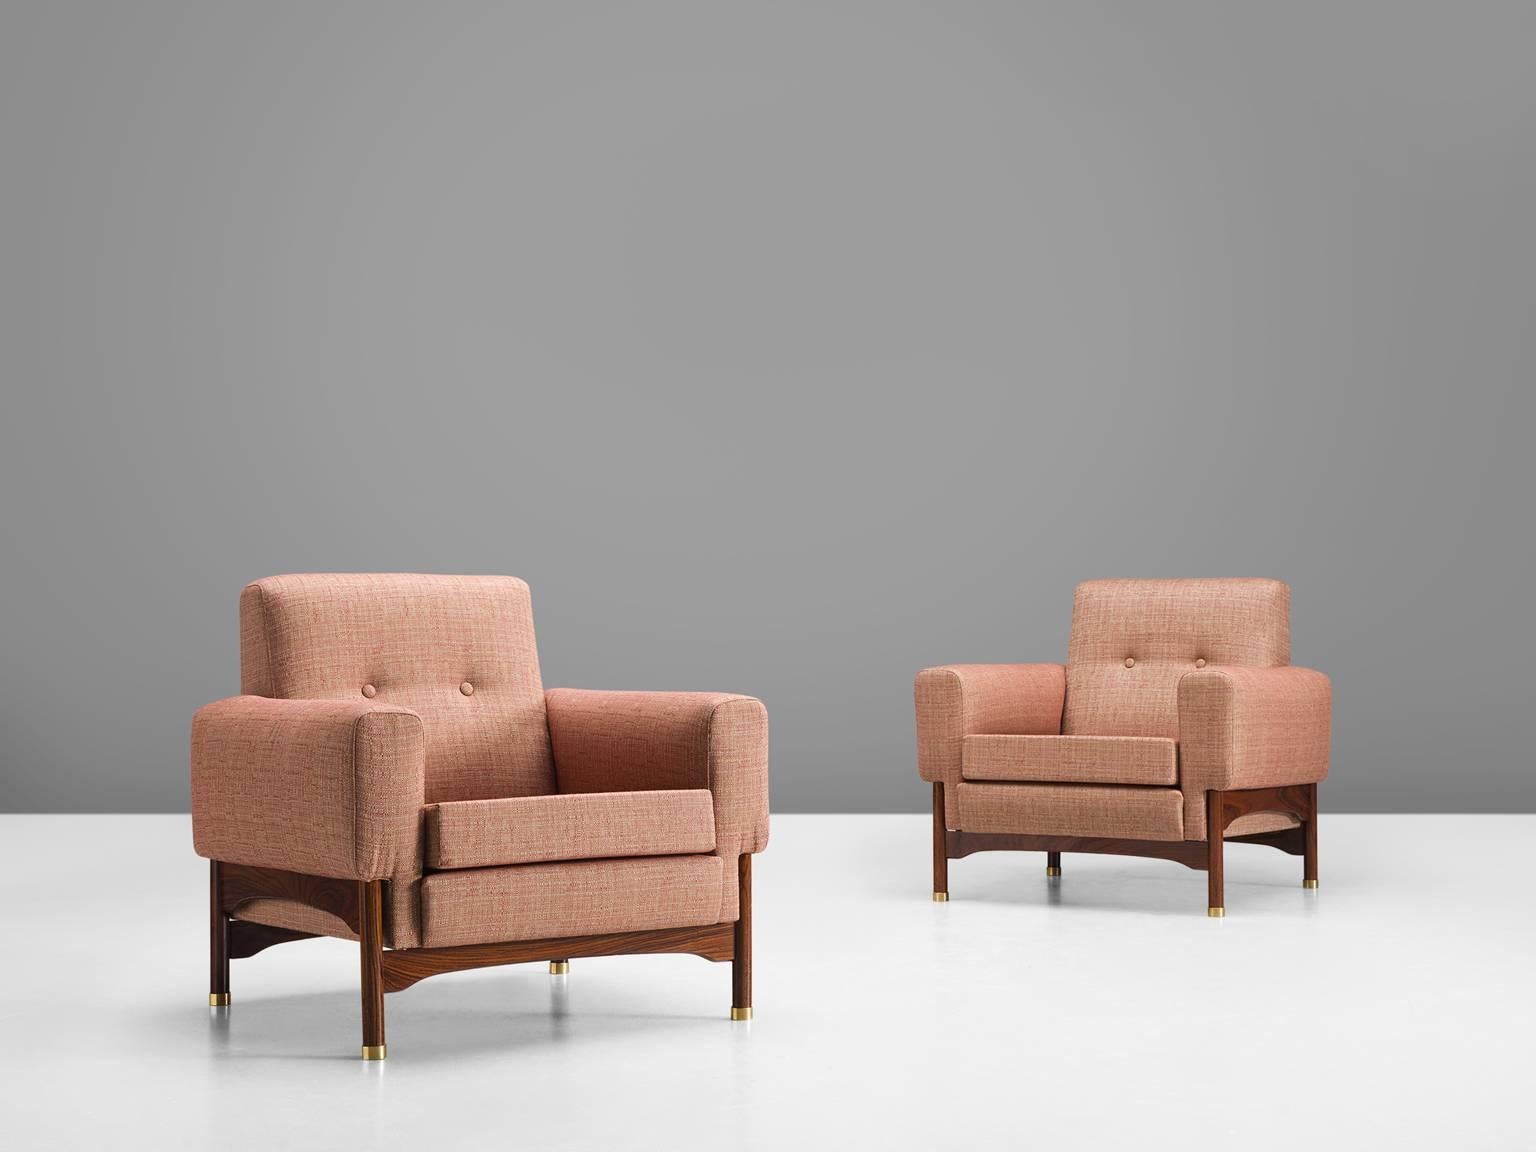 Pair of lounge chairs pink upholstery, rosewood, Italy, 1960s.

This elegant, geometric pair of lounge chairs feature a muted pink upholstery. Eloquent detail is the slight curve on upper side of the frame and the brass feet. The armrests stand